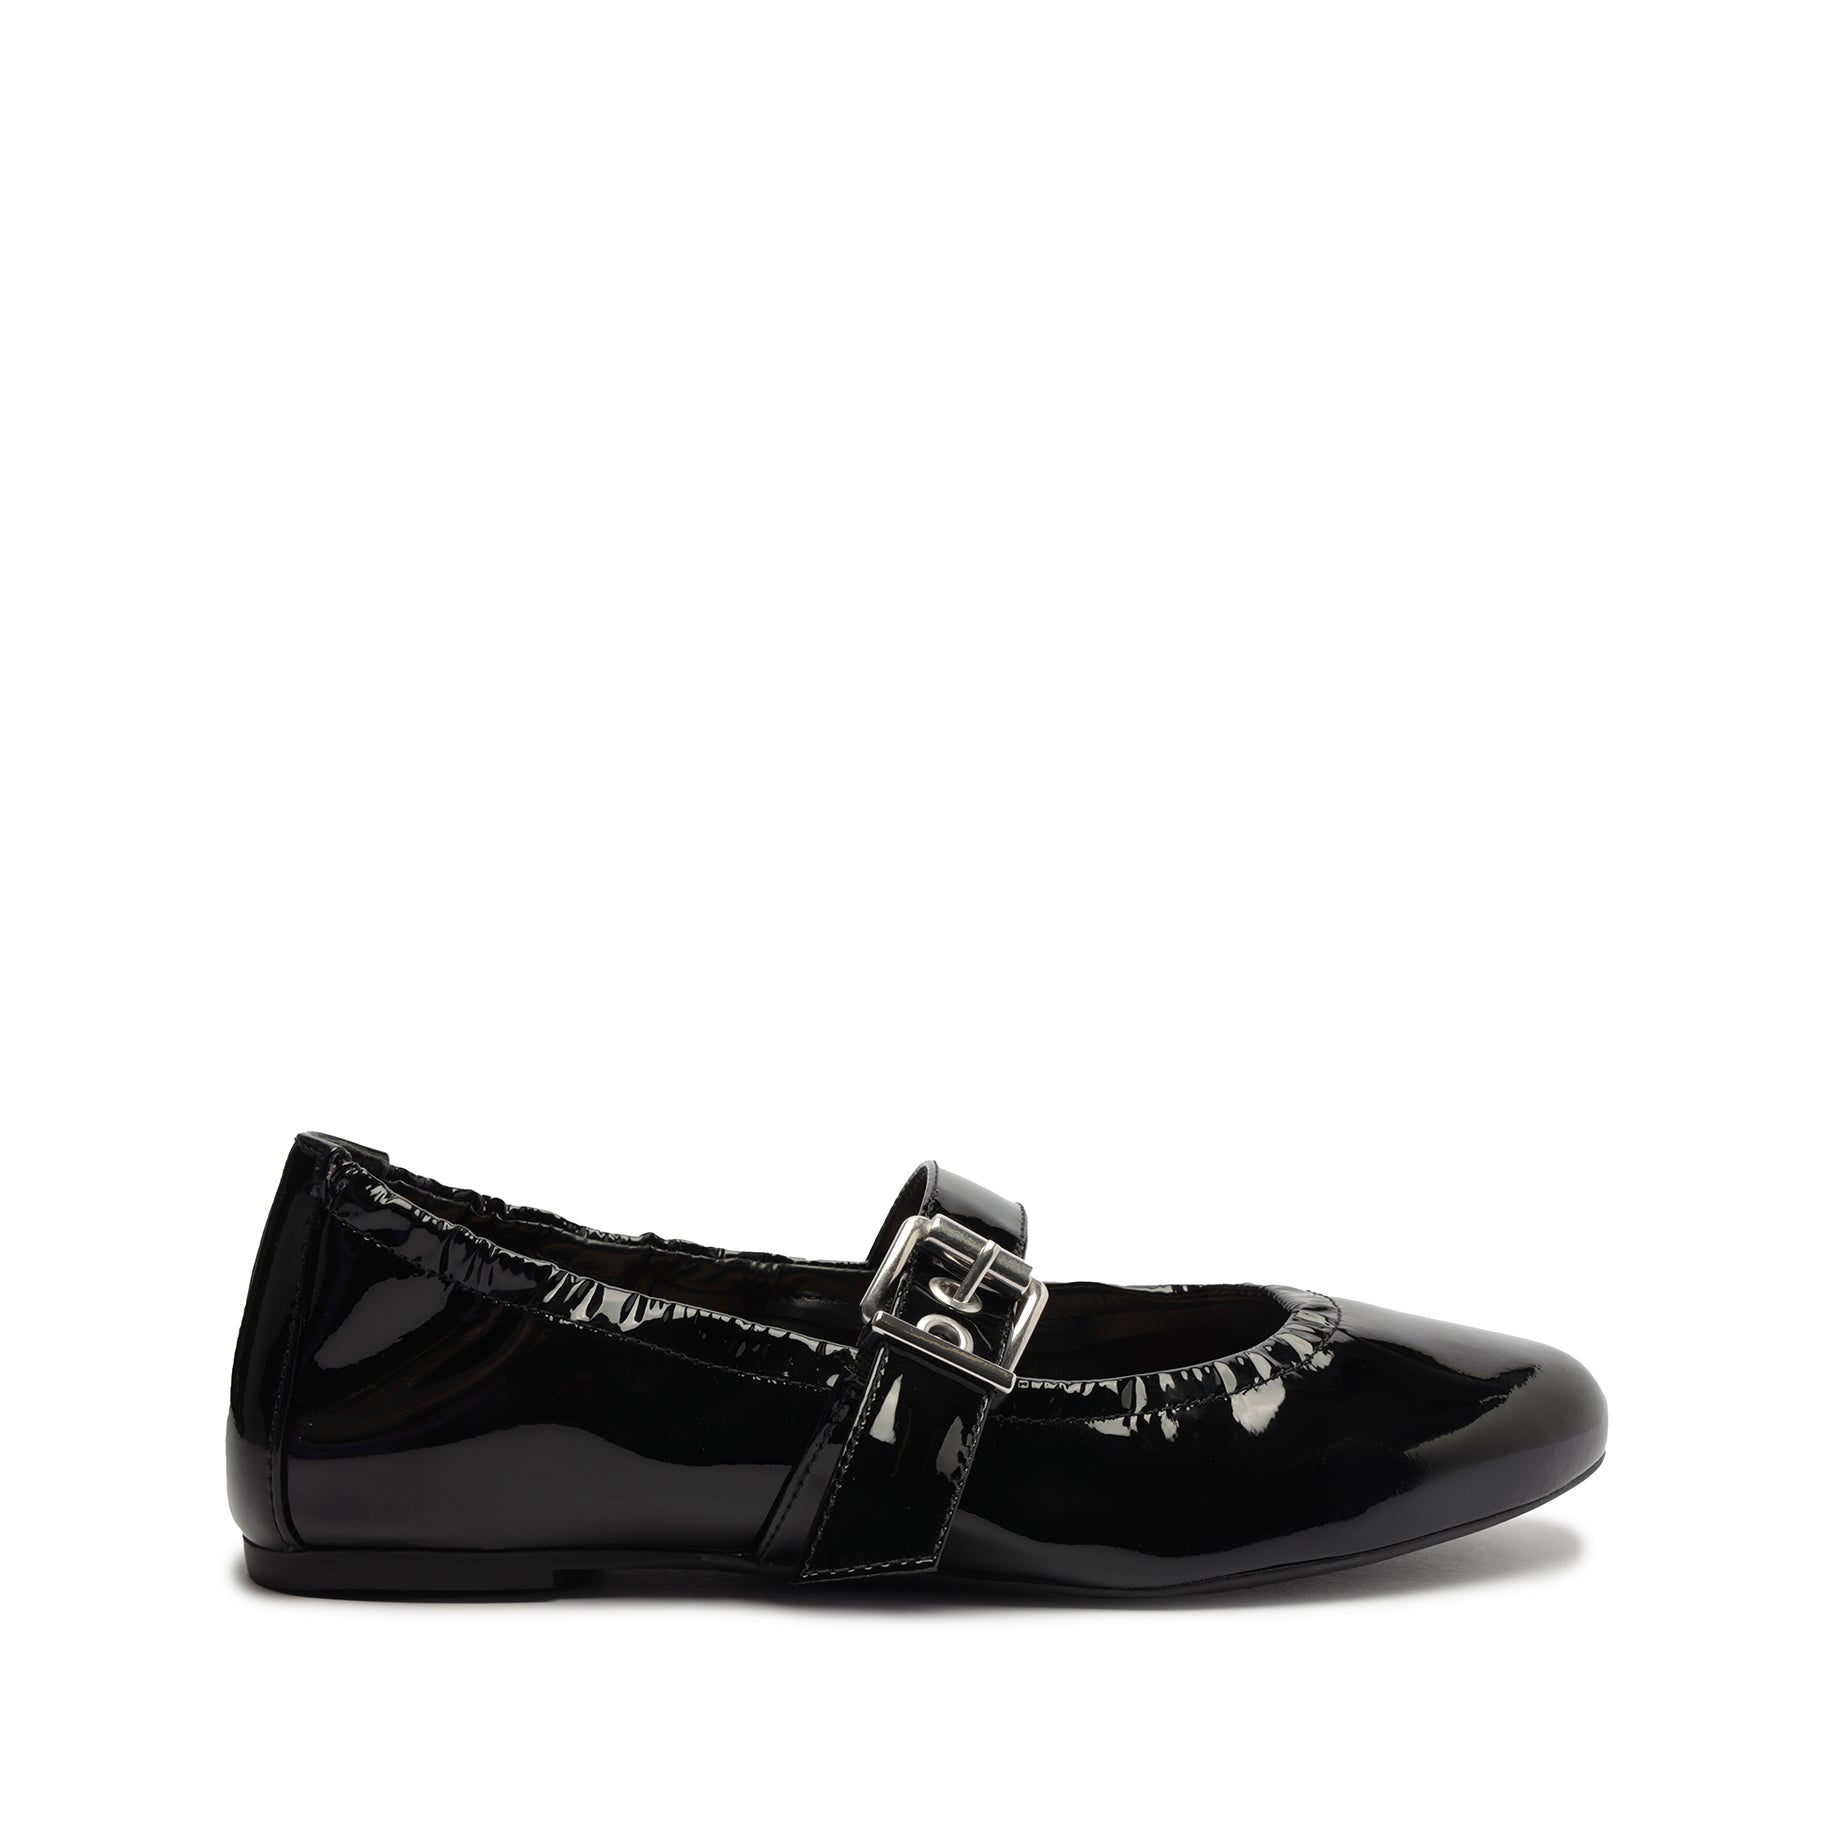 20mm Patent Leather Flats